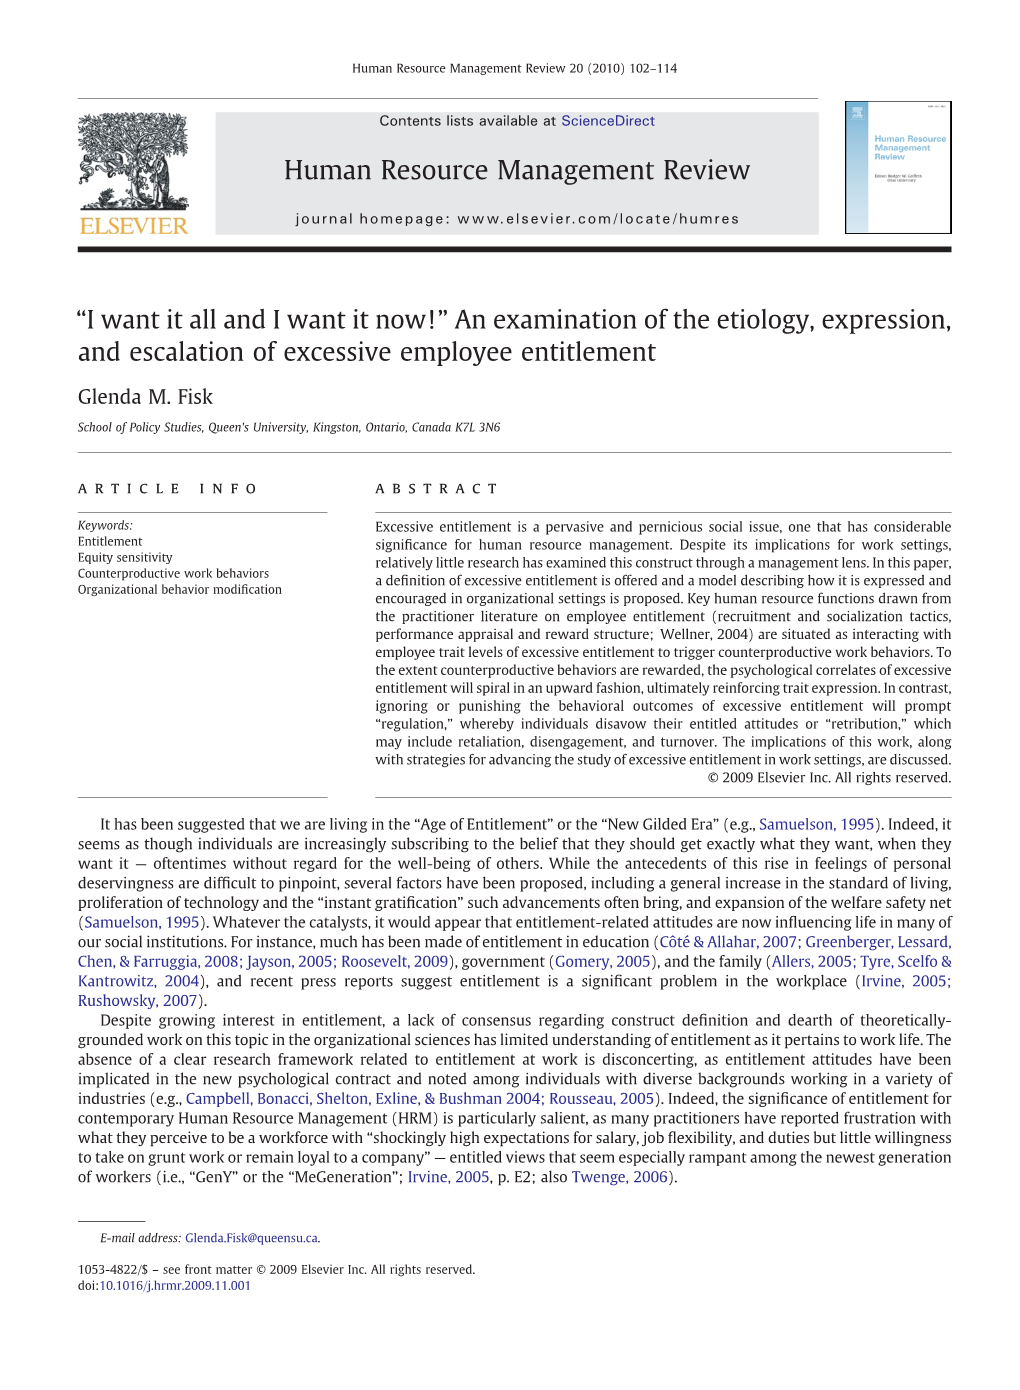 An Examination of the Etiology, Expression, and Escalation of Excessive Employee Entitlement